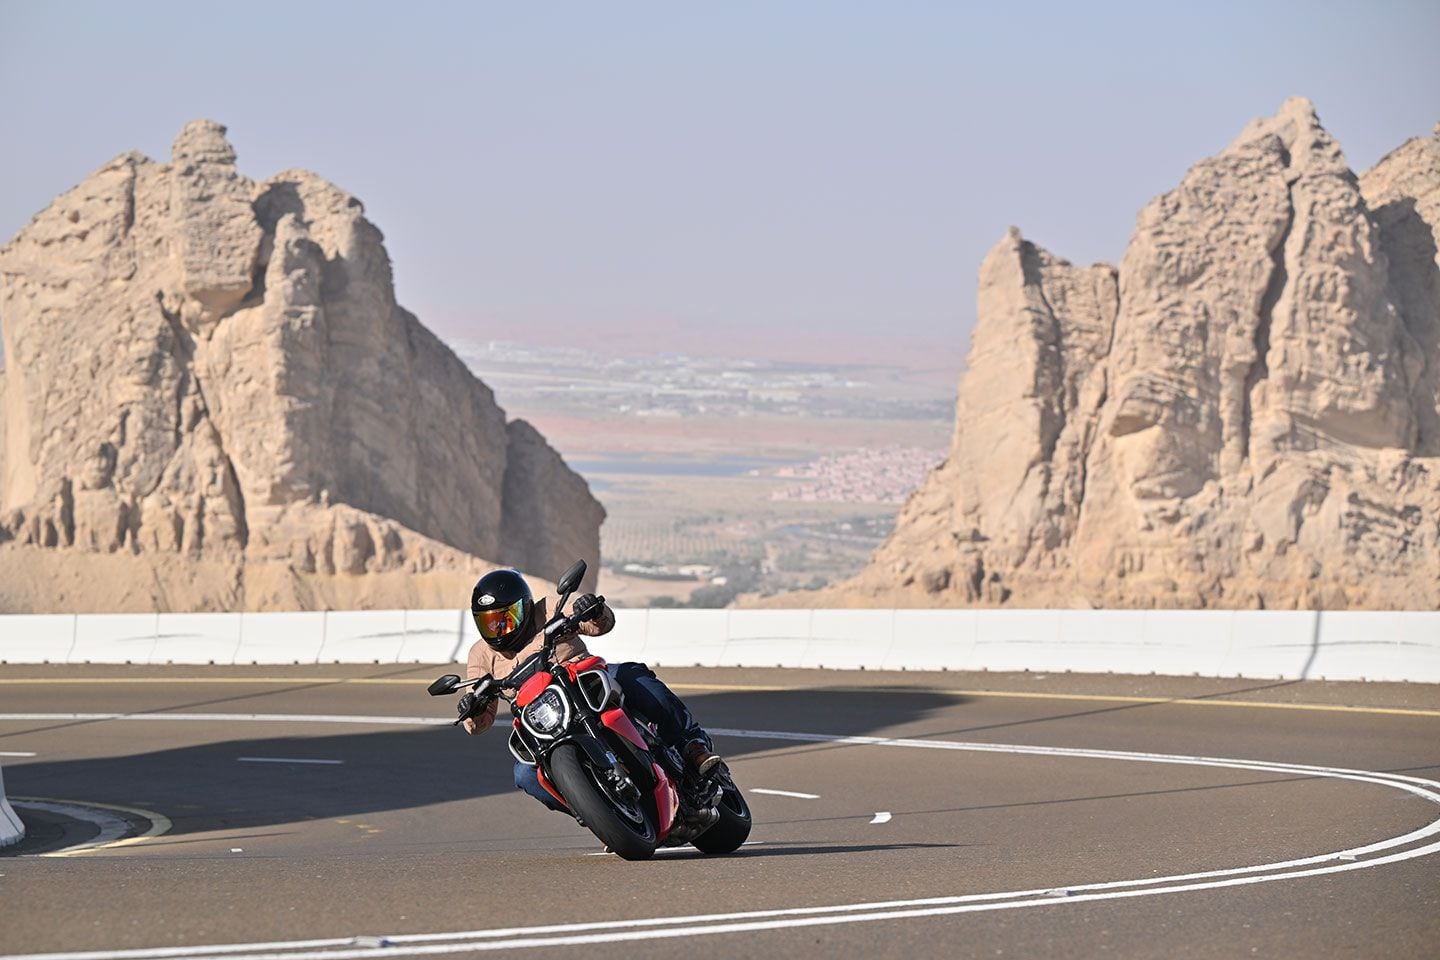 Not a sportbike? Could have fooled us! Handling performance of the Diavel V4 is far beyond what is expected of a cruiser.